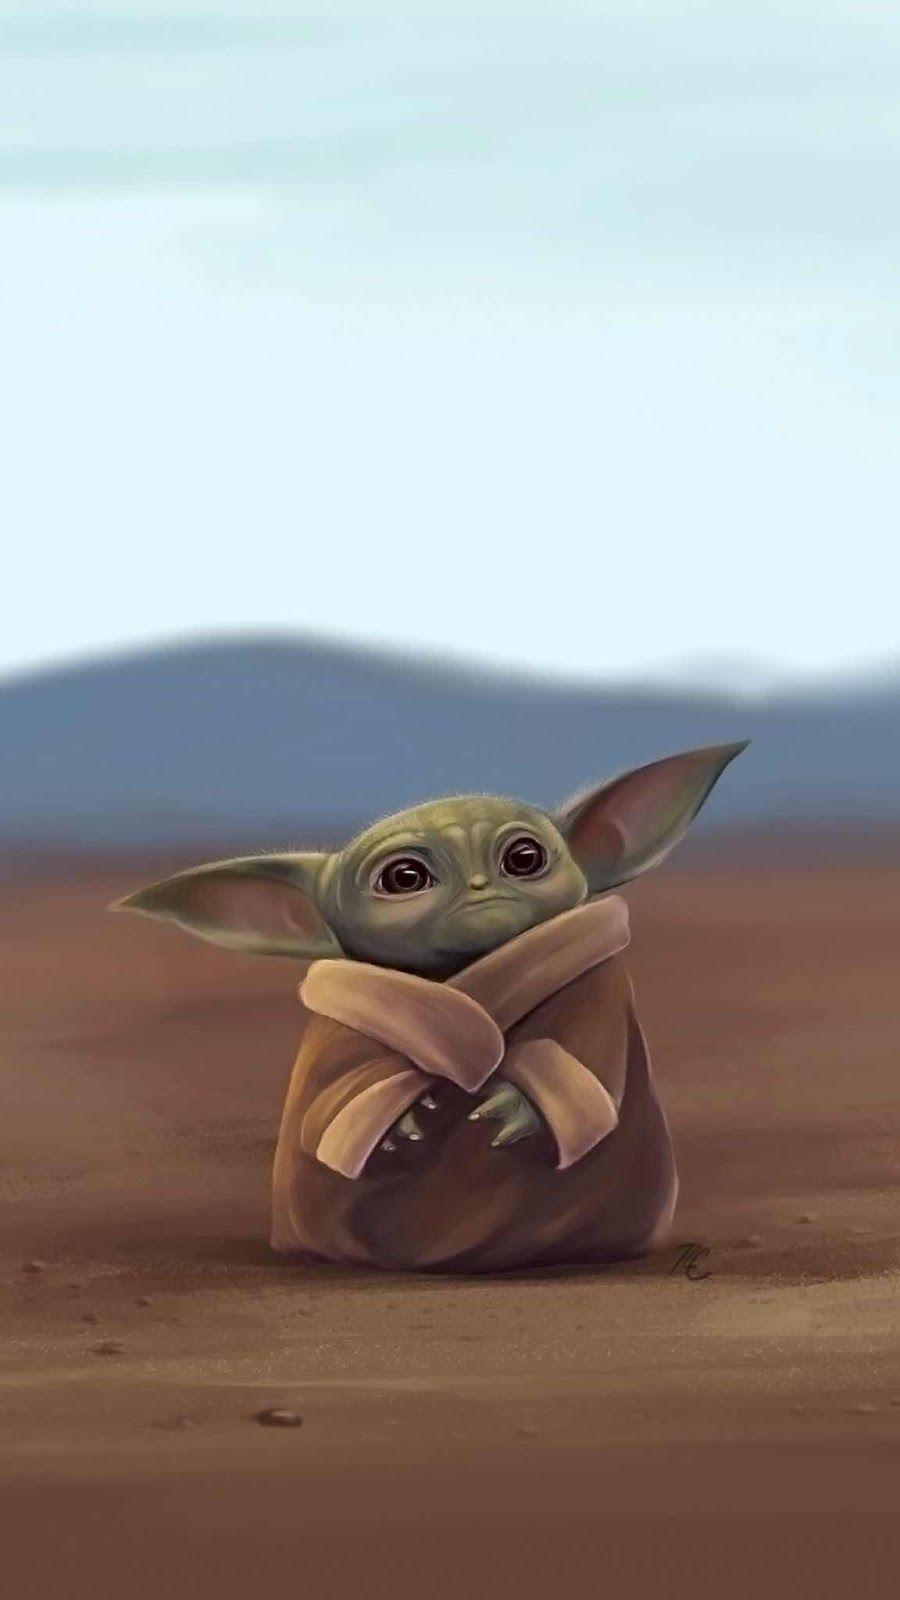 iPhone and Android Wallpaper: Baby Yoda Wallpaper for iPhone